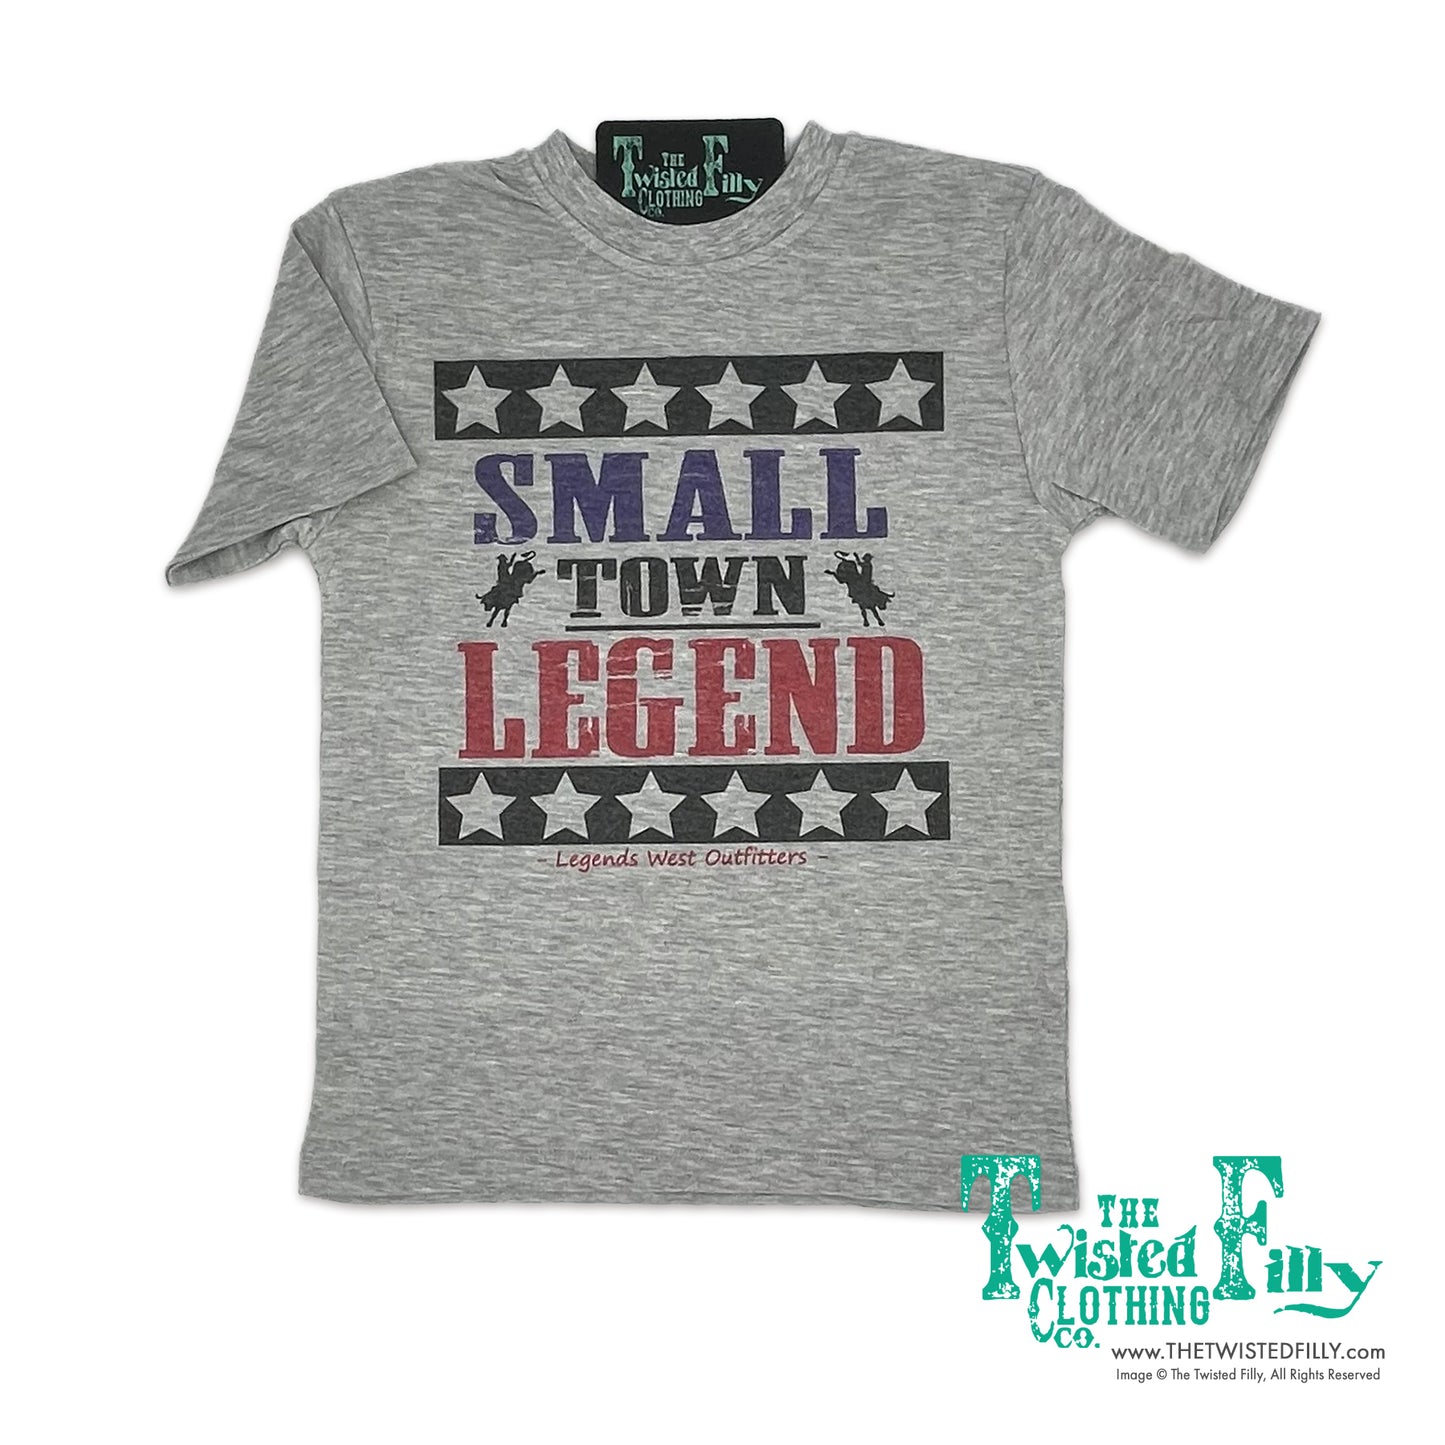 Small Town Legend - S/S Youth Tee - Gray